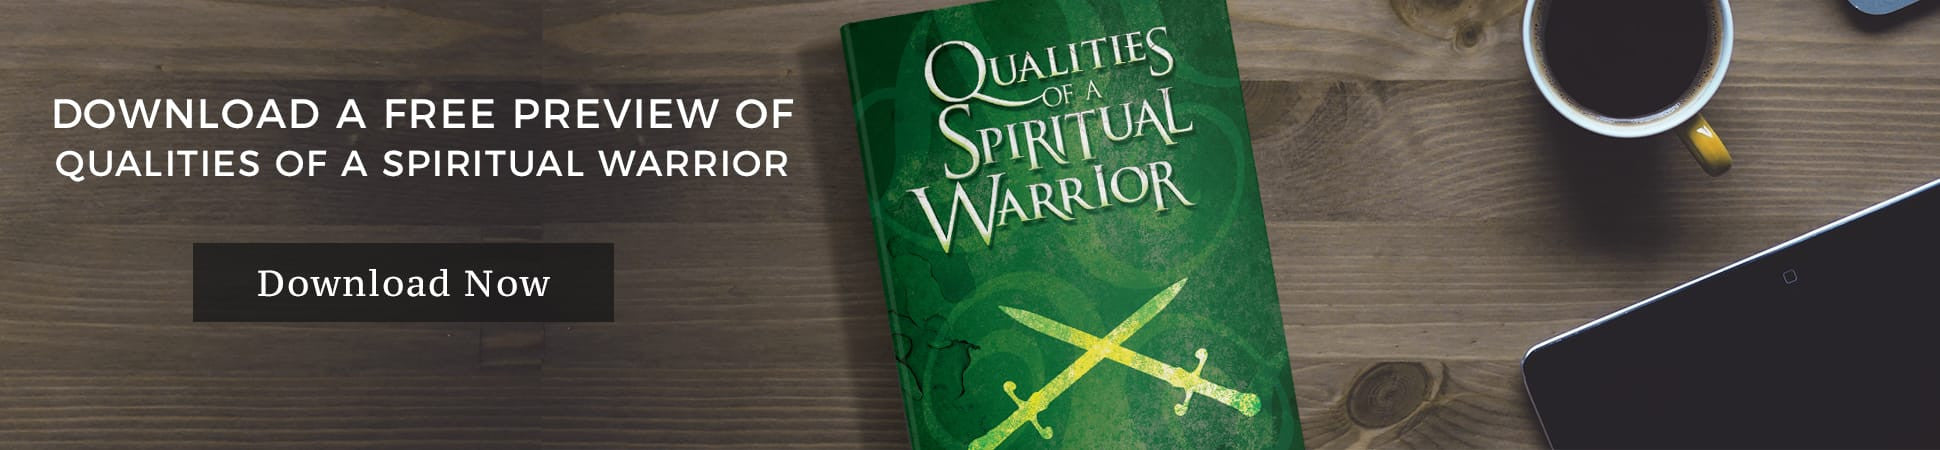 Qualities of a Spiritual Warrior FREE preview